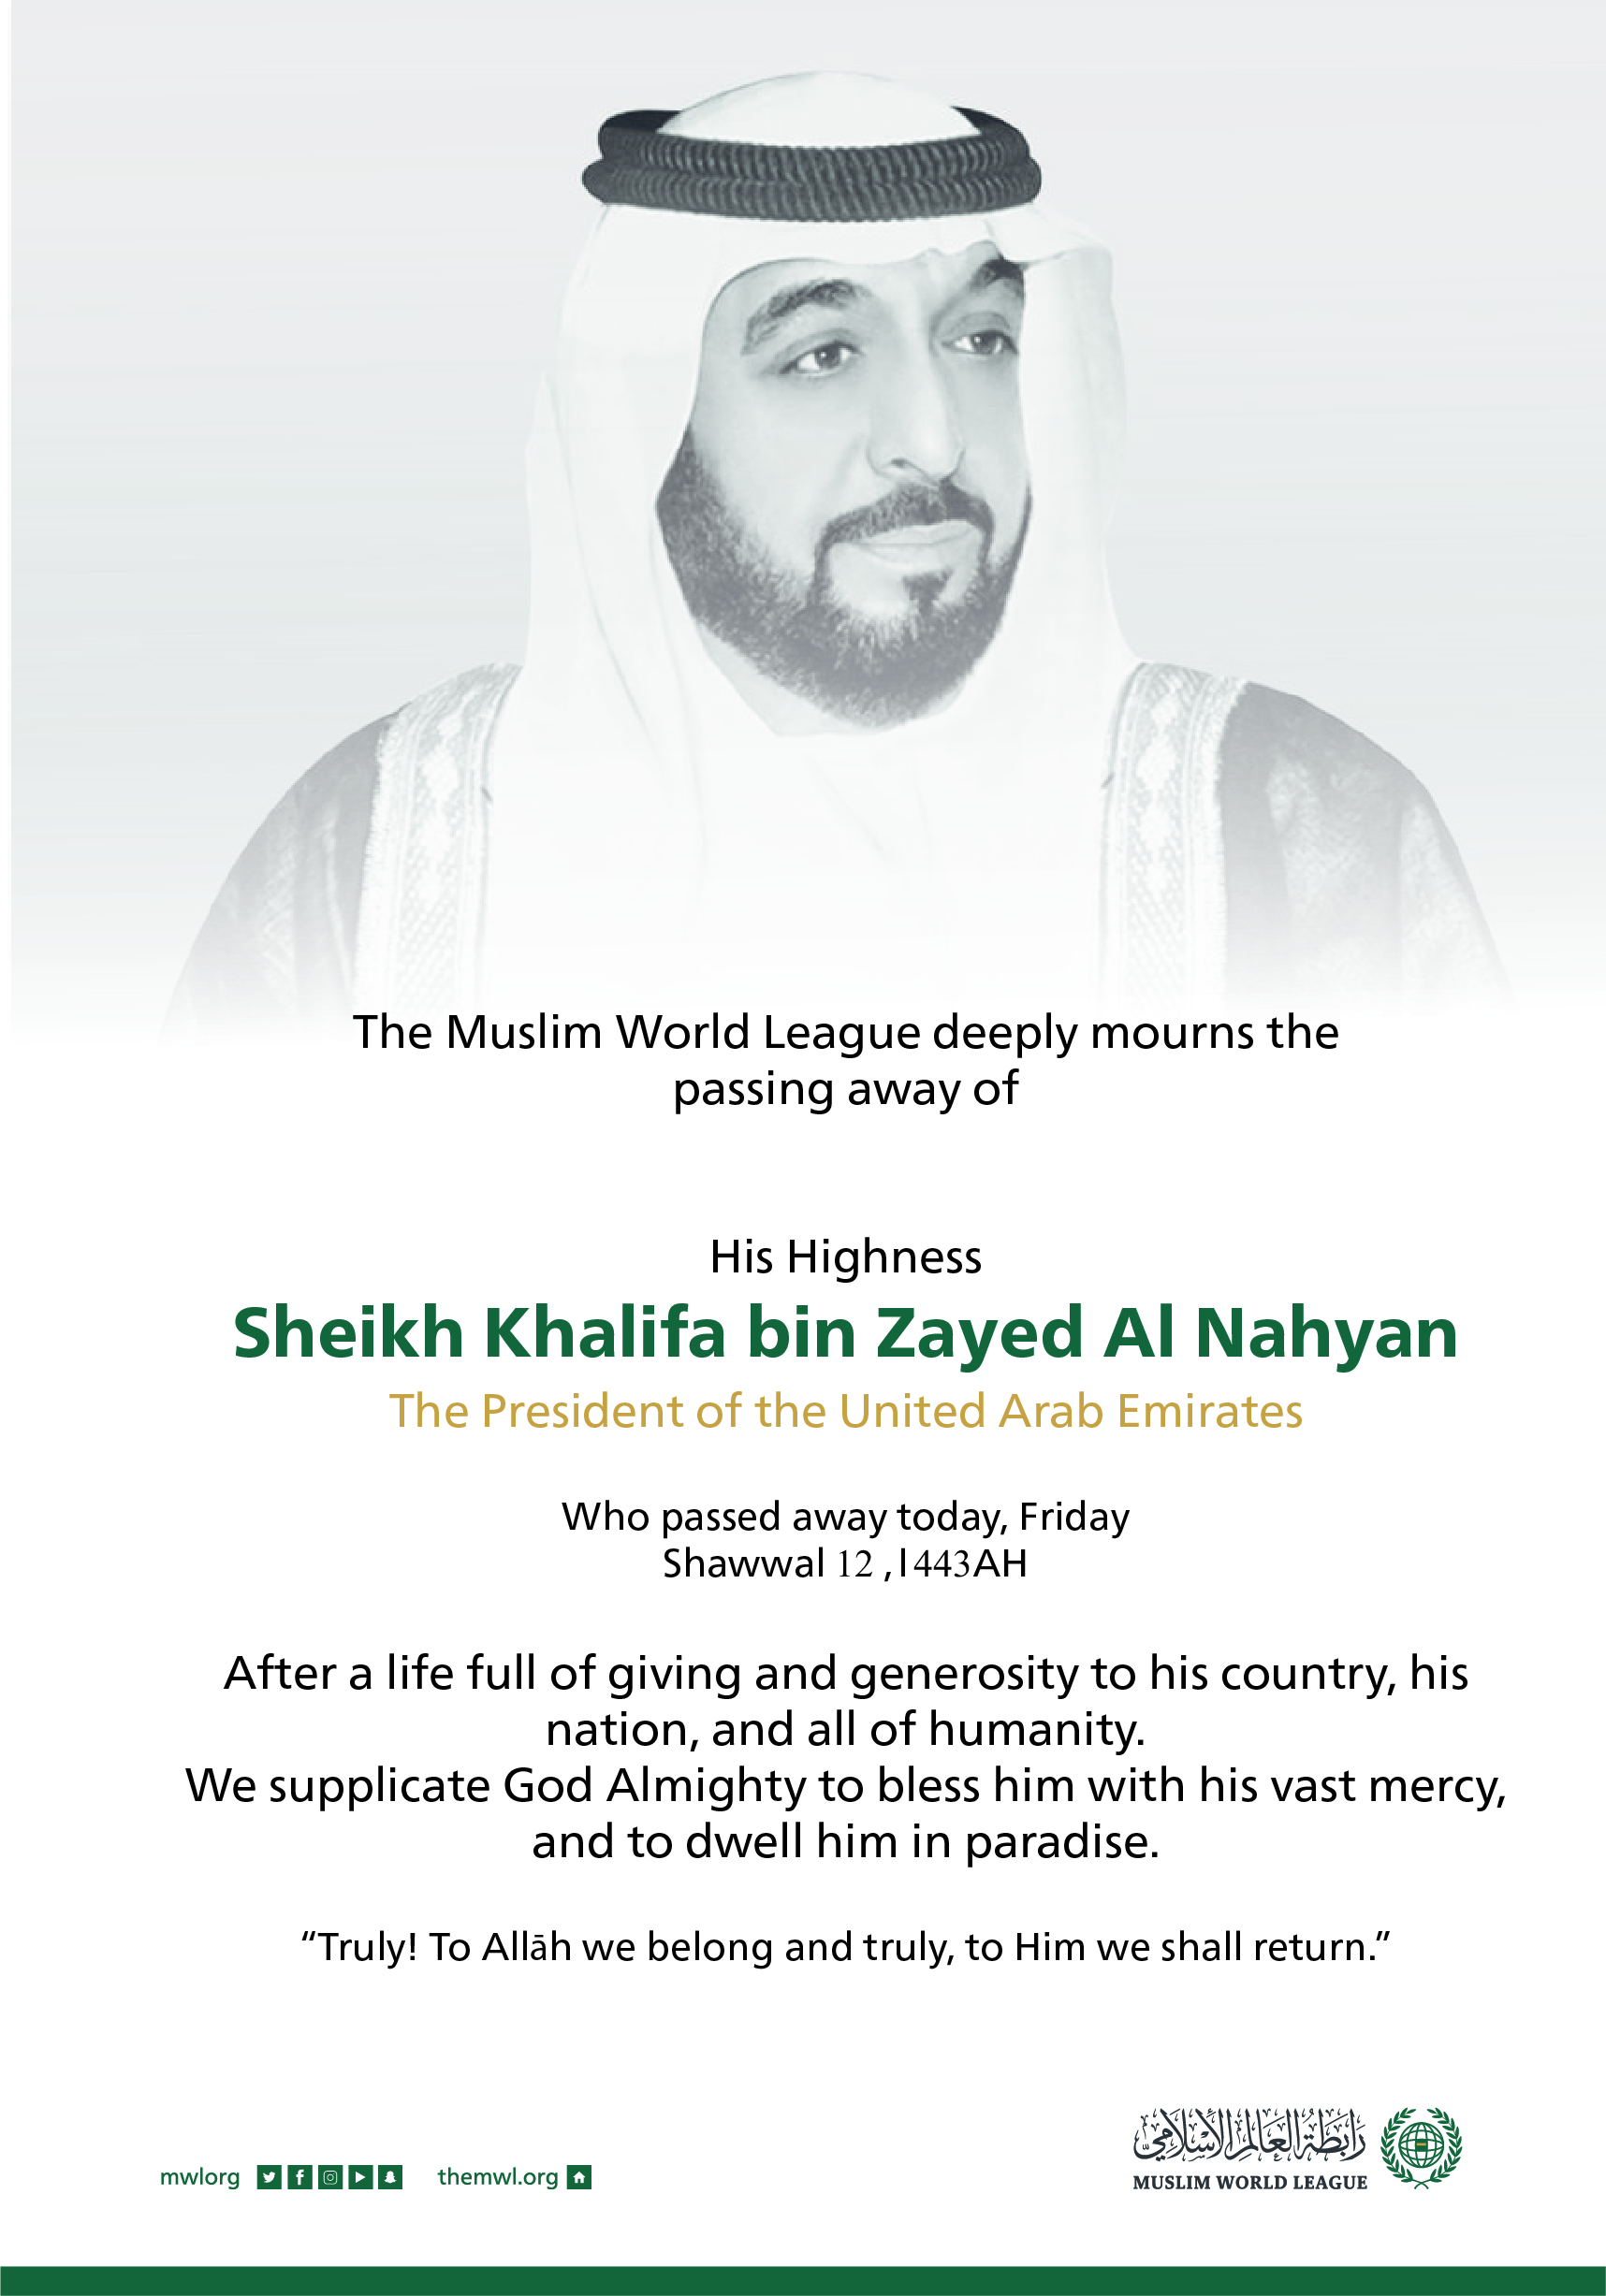 The Muslim World League extends its sincere condolences to the United Arab Emirates, leadership and people, on the passing of SheikhKhalifa bin Zayed, may God forgive him and have mercy on him and dwell him in paradise.